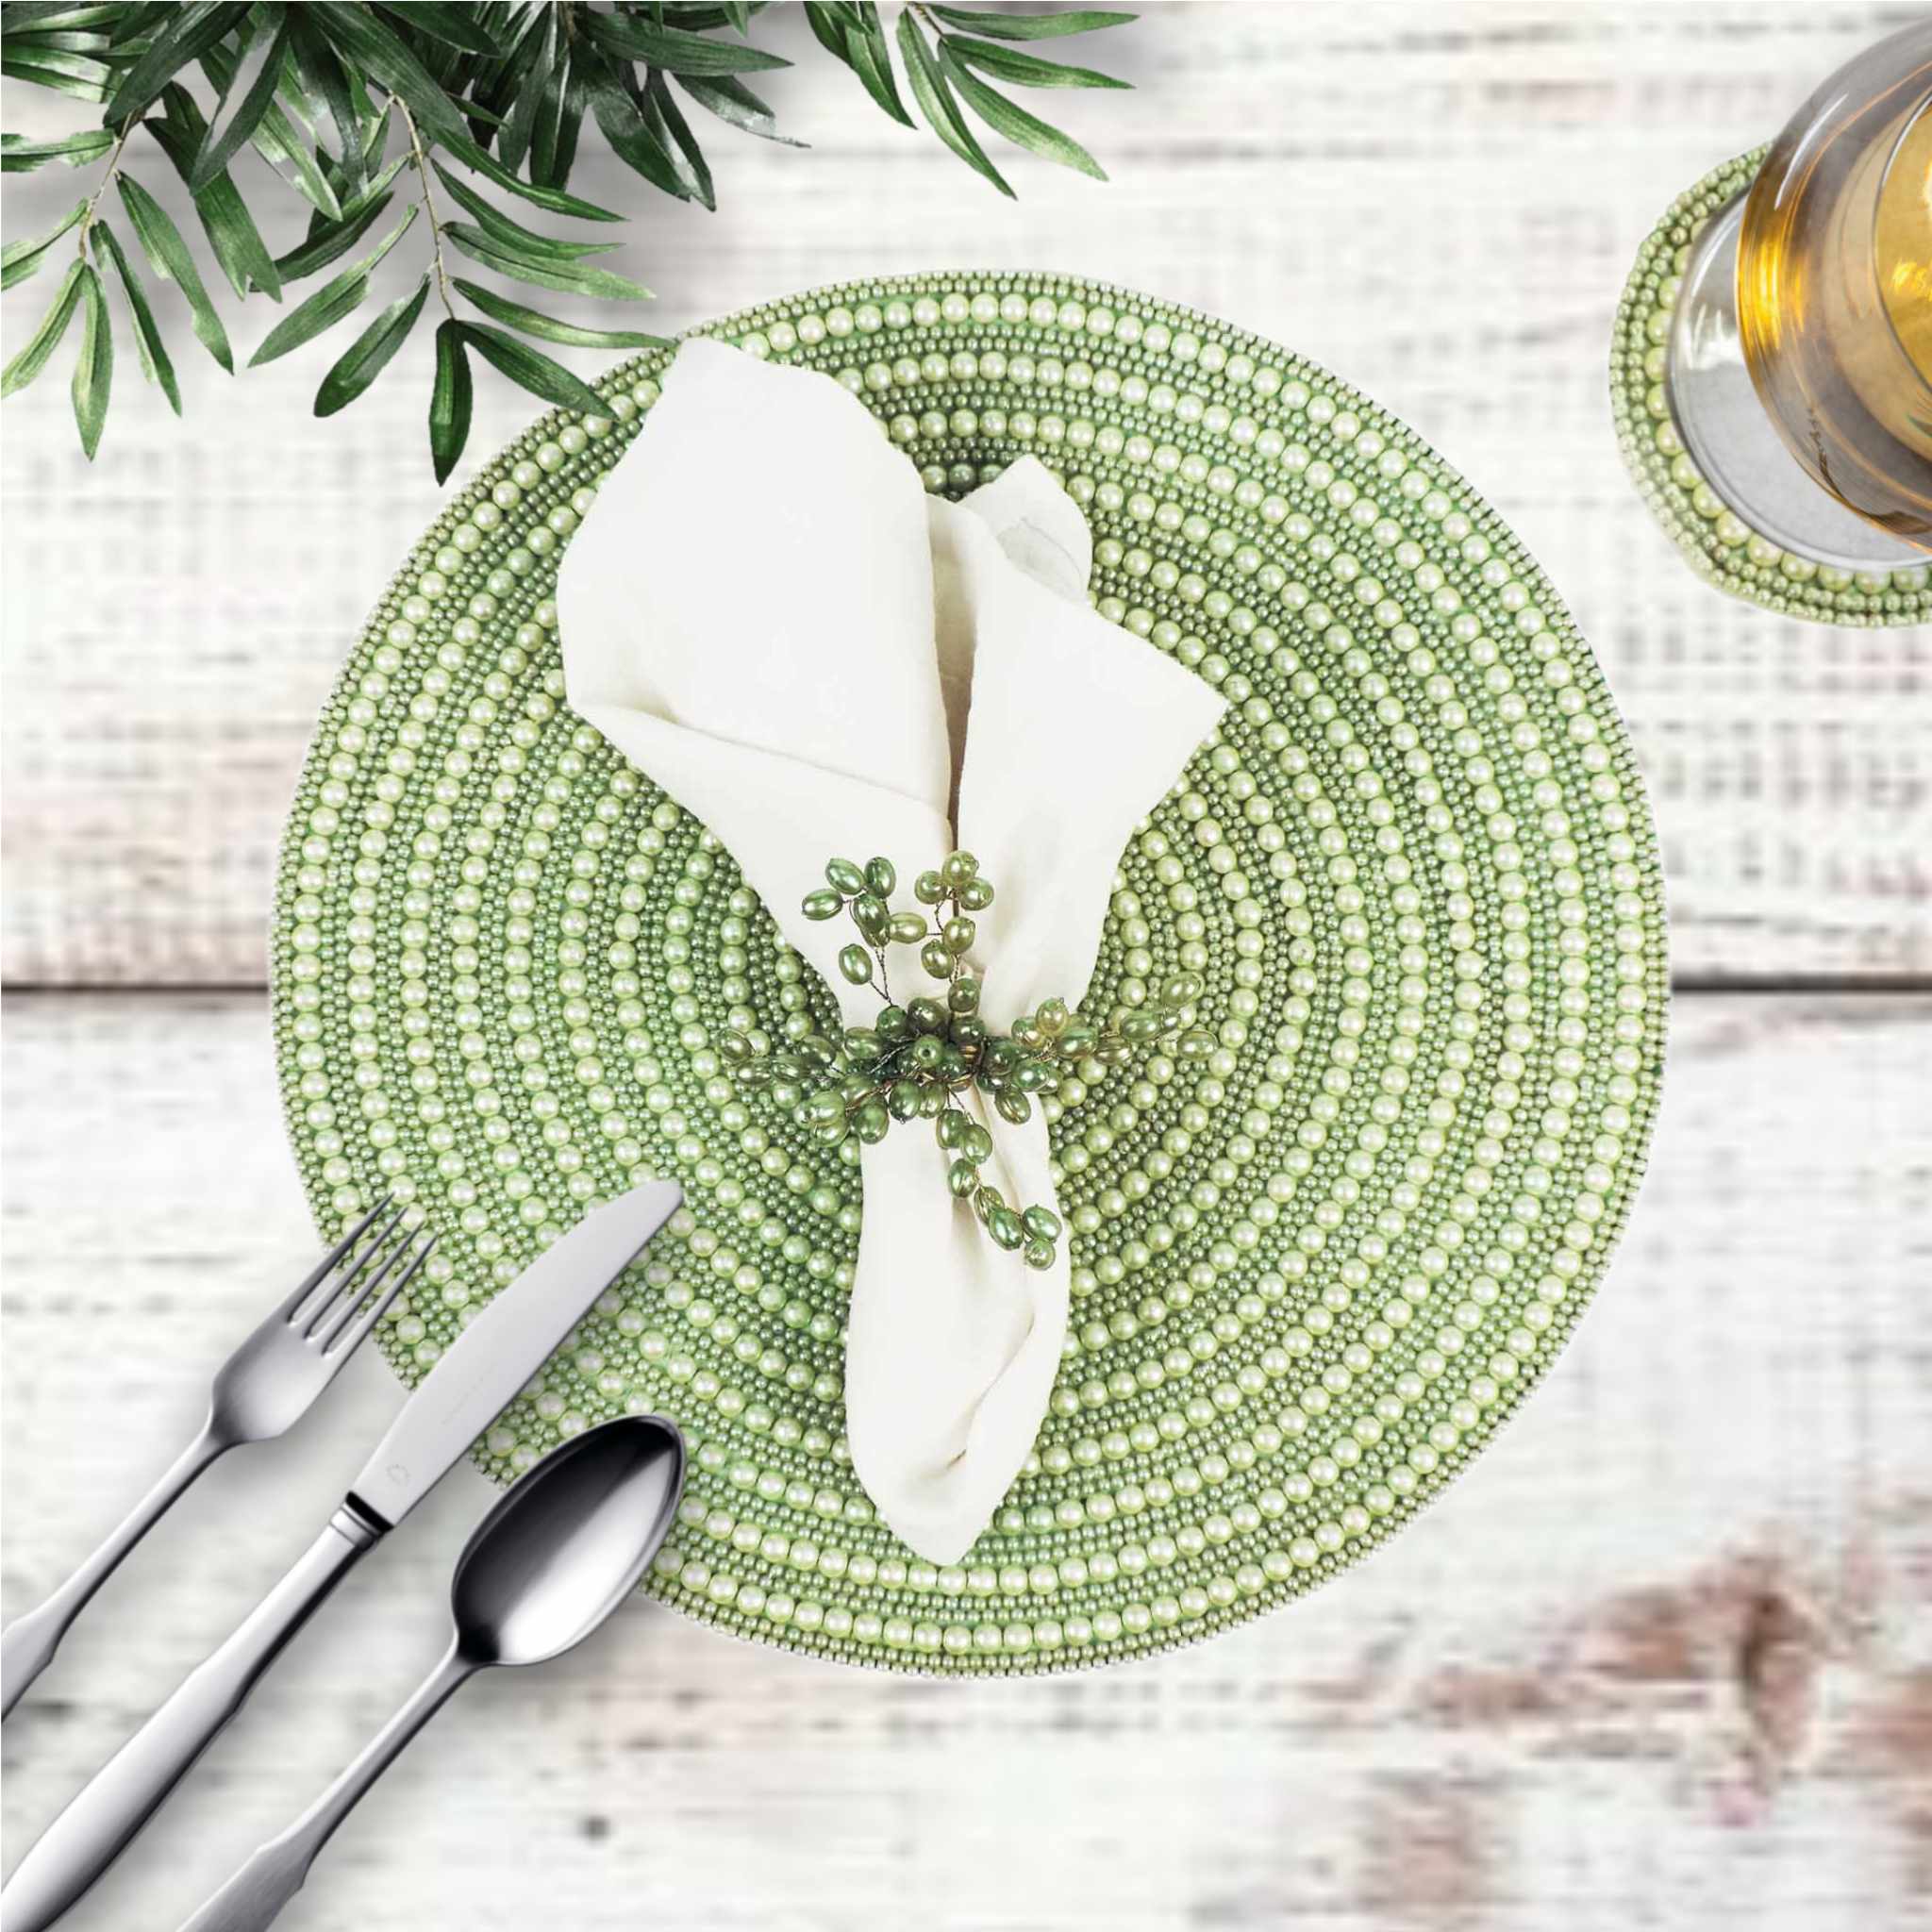 Whirl Bead Table Setting for 4 - Embroidered Placemats, Coasters & Napkin Rings in Light Green